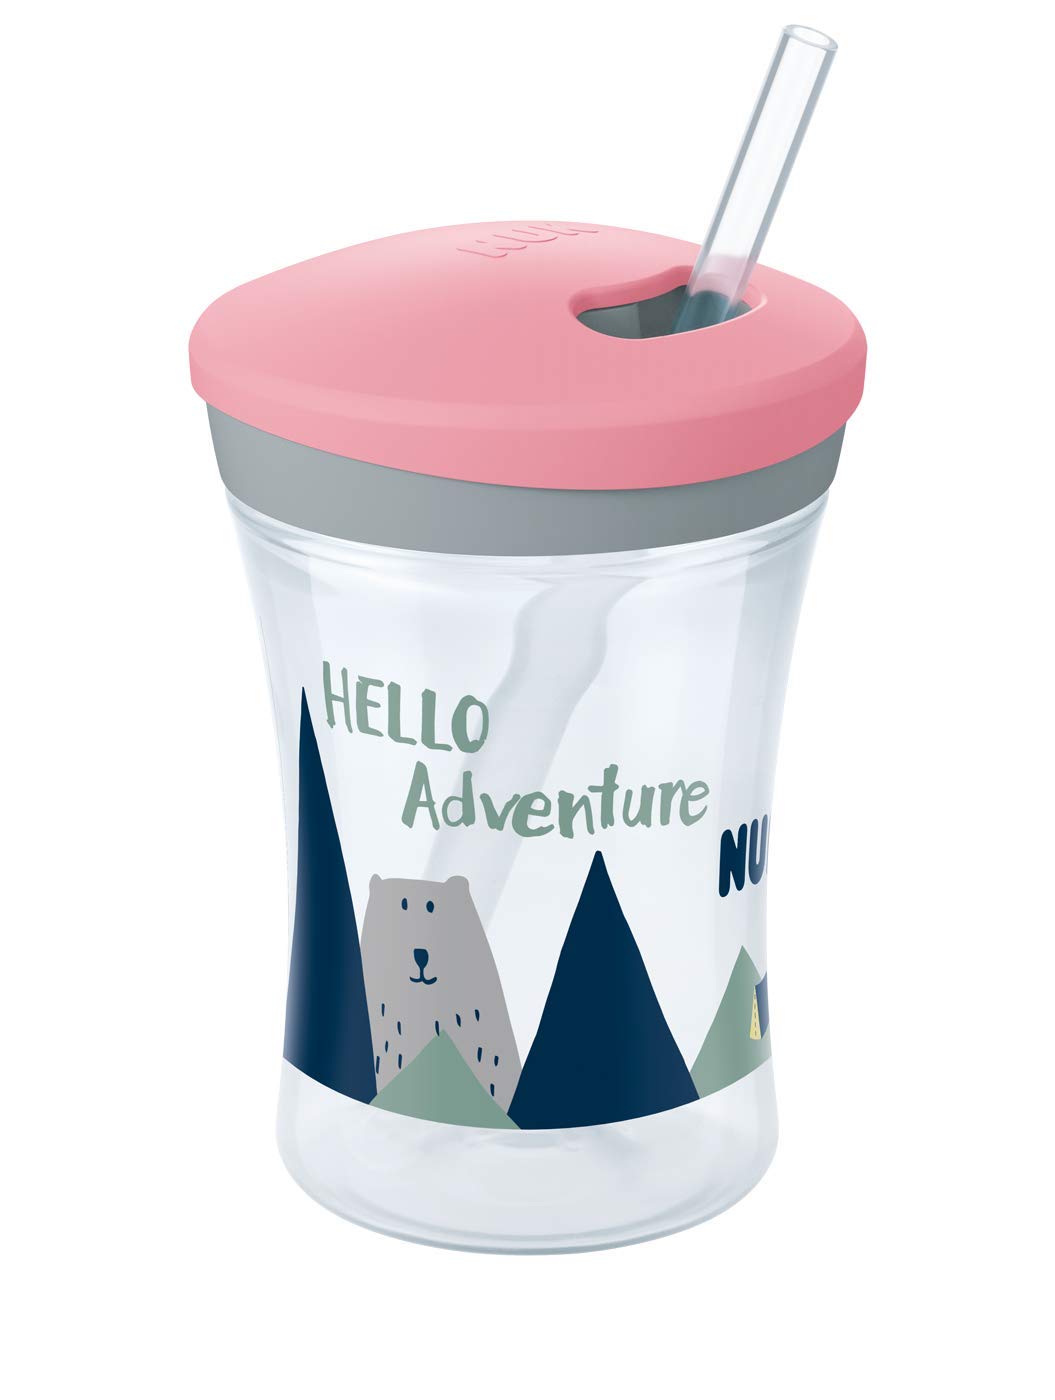 NUK Action Cup Learn-to-Drink Bottle